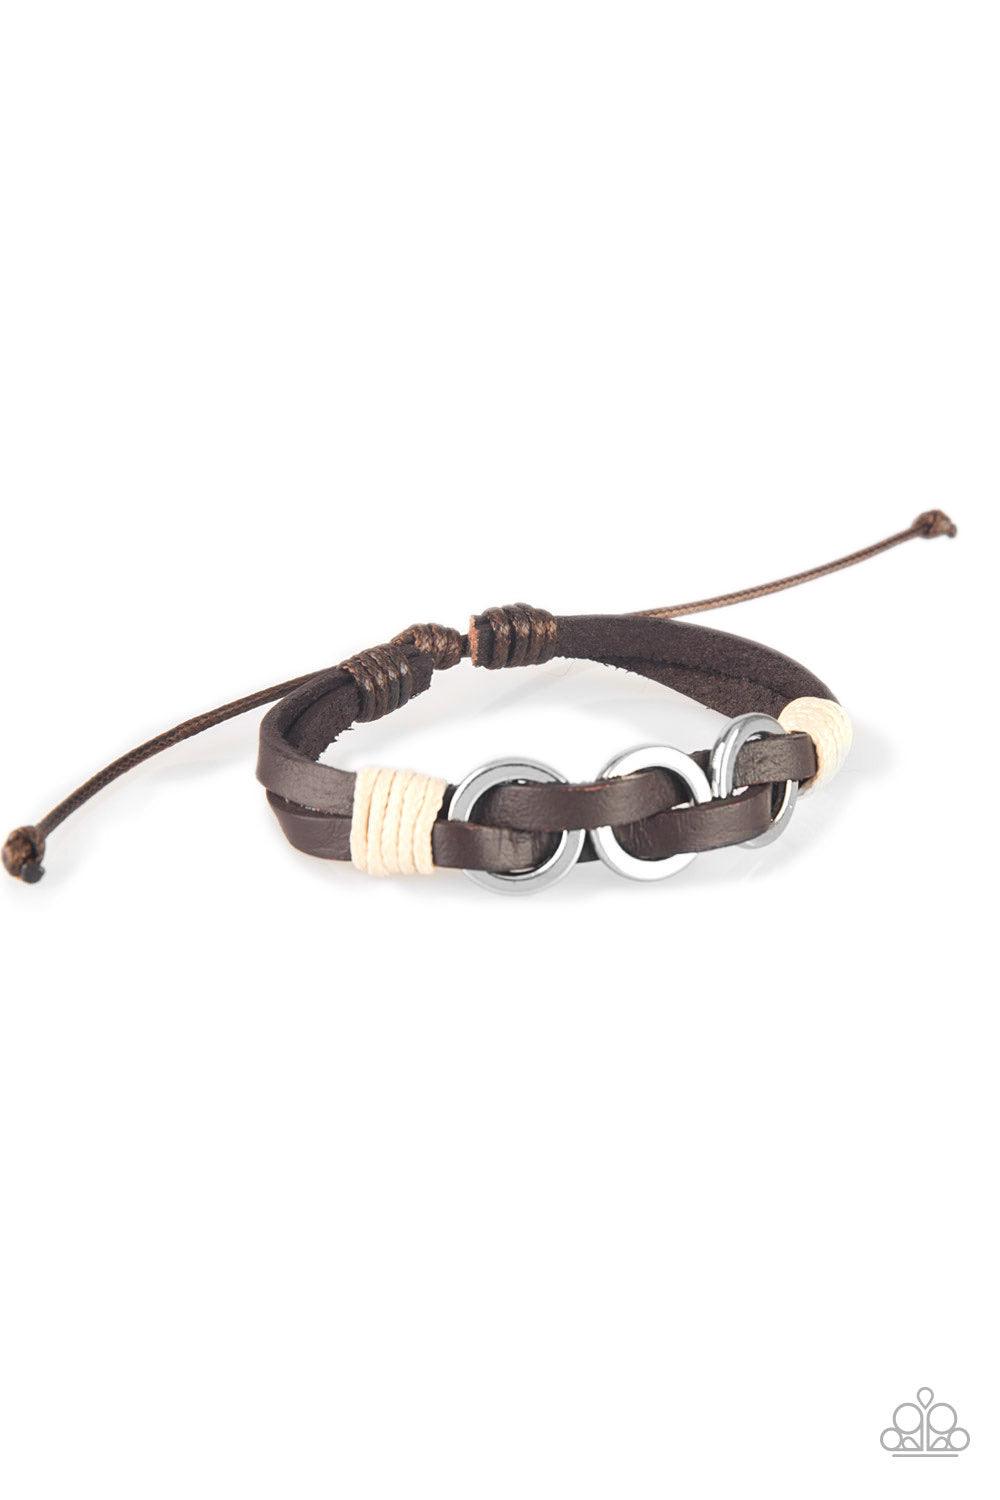 Paparazzi Accessories Off-Road Tourist - Brown Infused with white twine cording, antiqued silver rings are threaded along strands of brown leather bands for a rustic look. Features an adjustable sliding knot closure. Jewelry